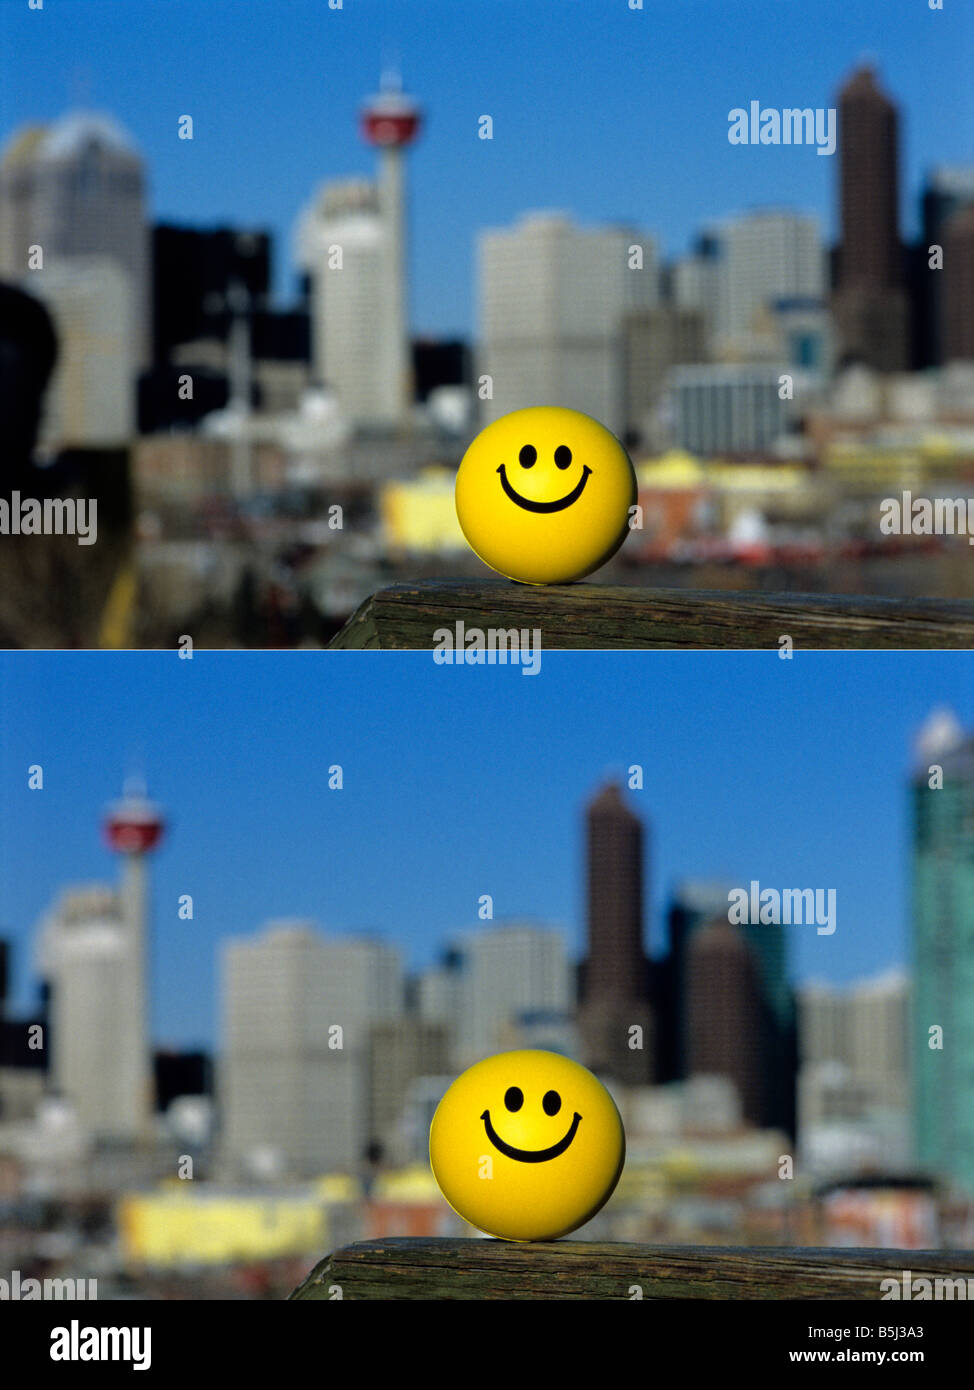 A smiley rubber ball against a cityscape in the background. Stock Photo